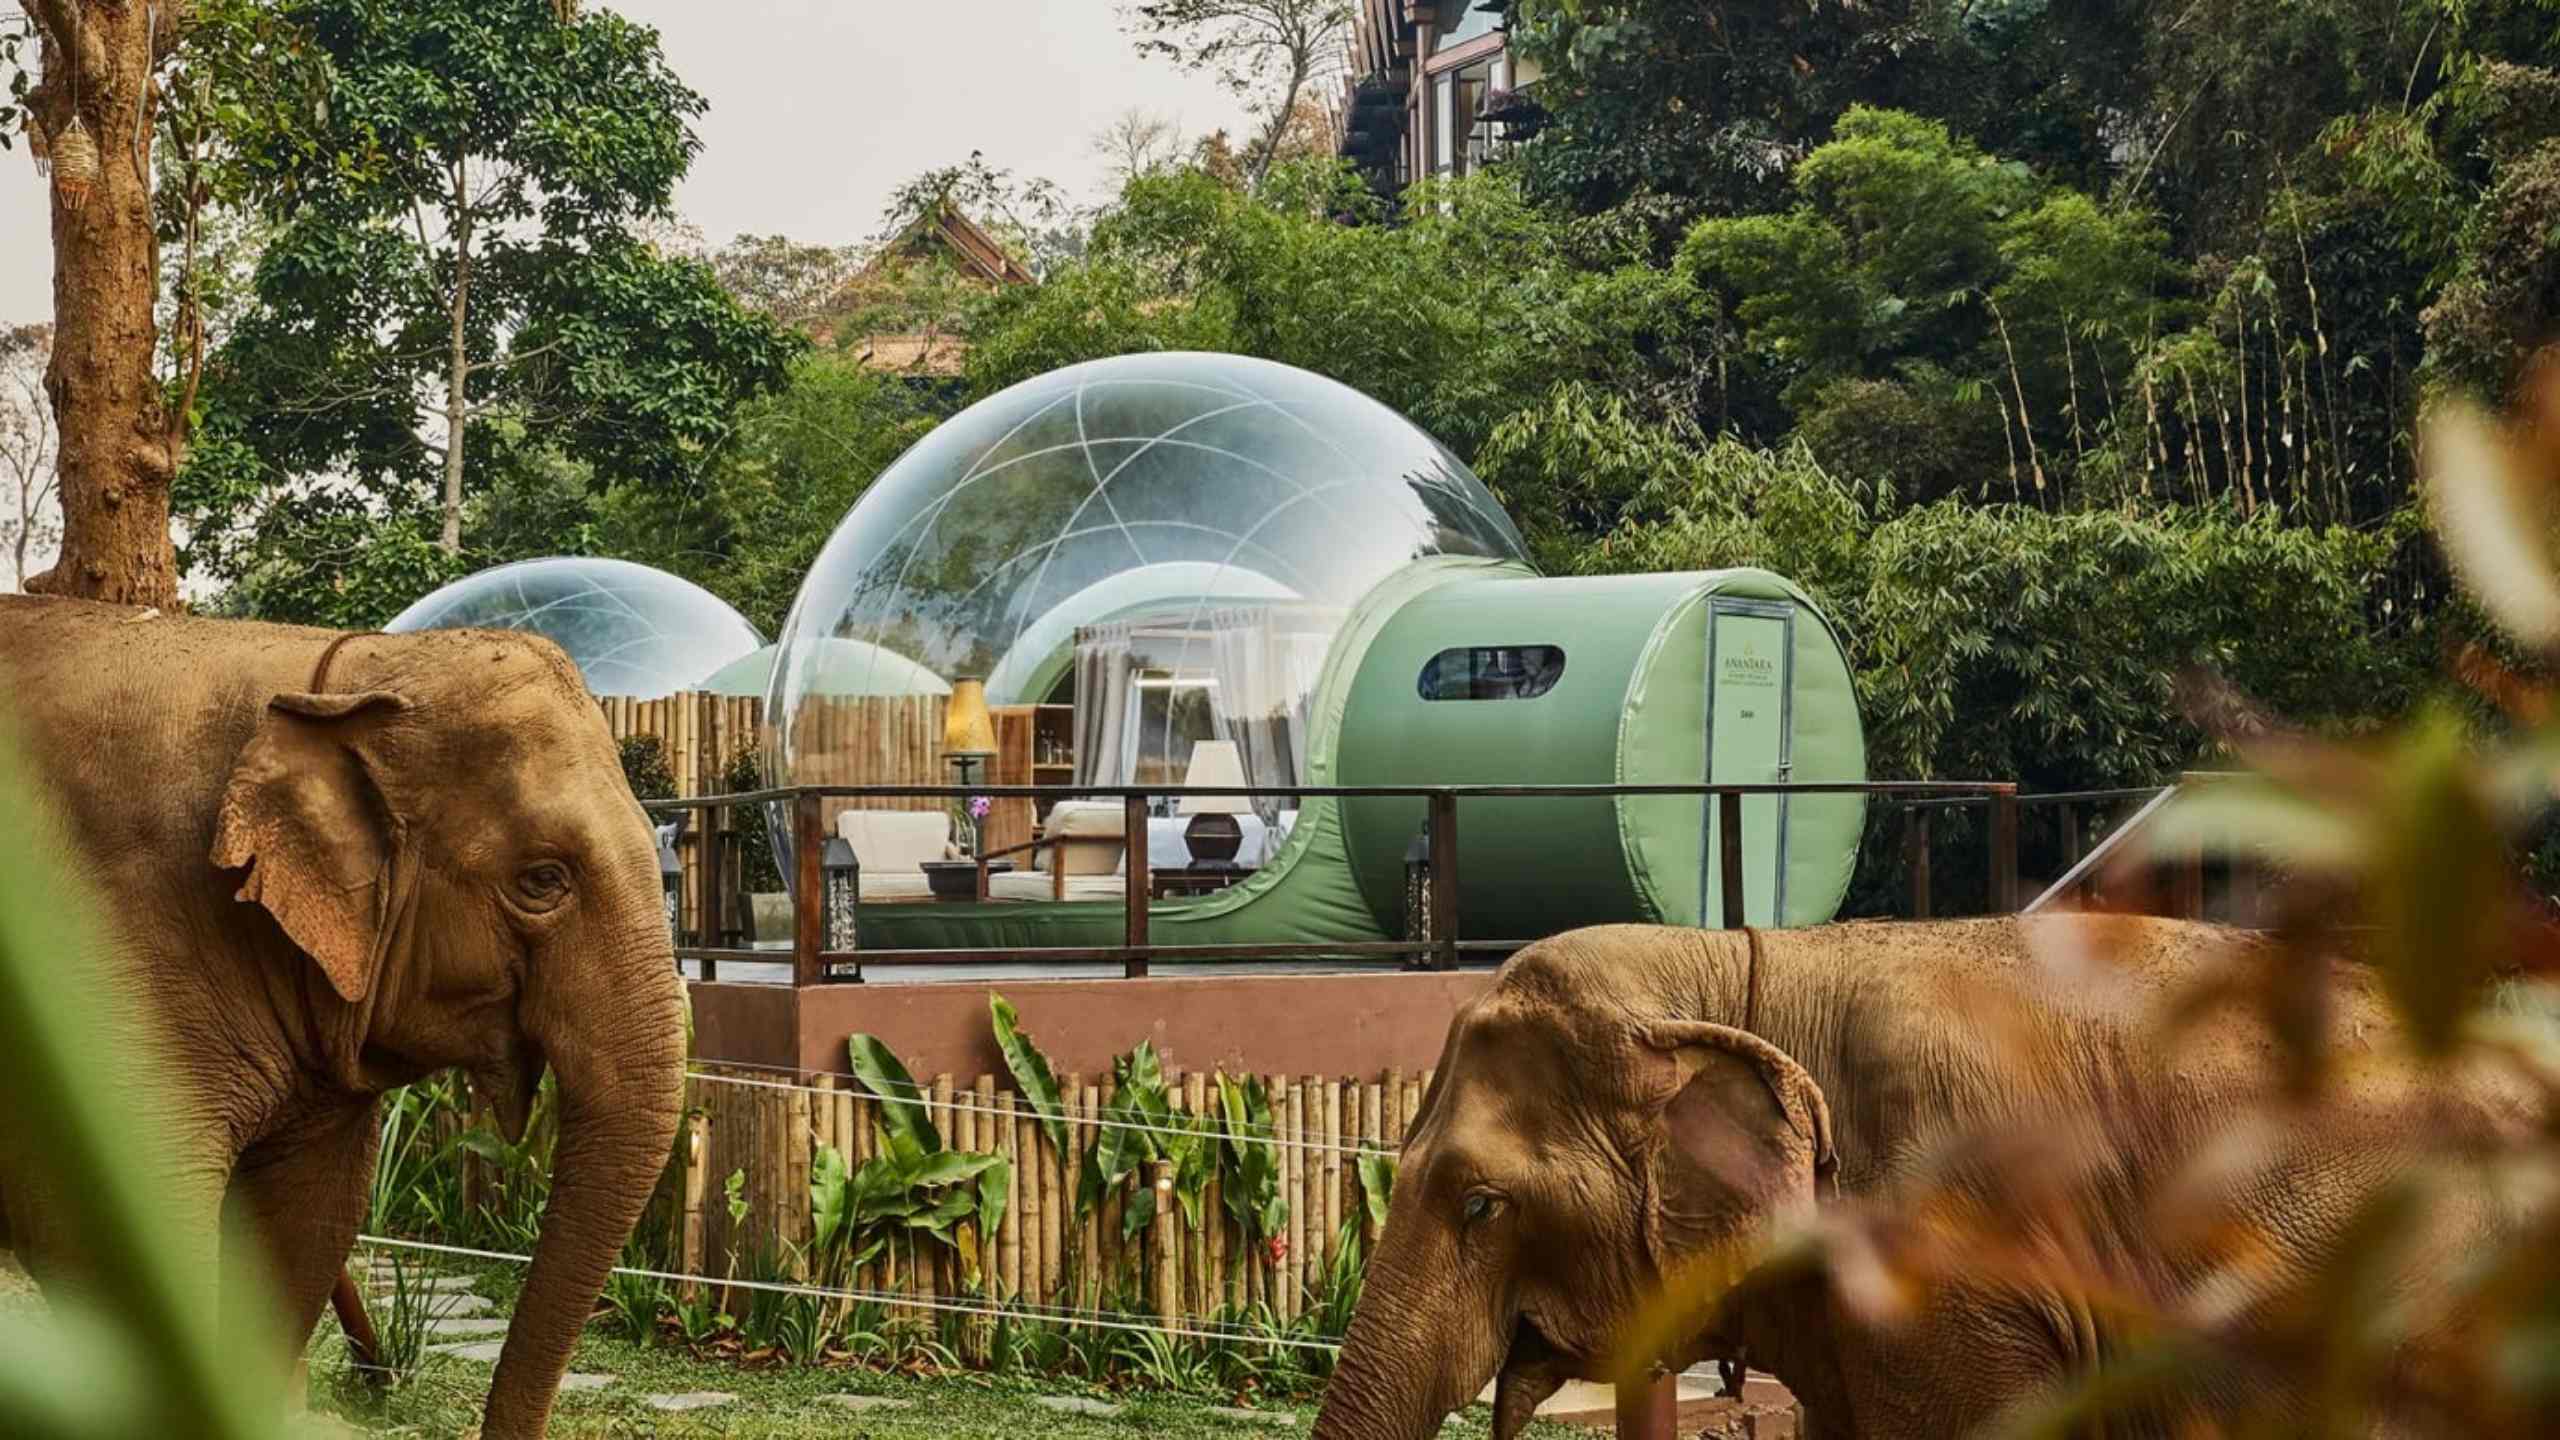 anantara-elephant-camp-thailand-exterior-view-elephants-in-front-of-jungle-bubbles